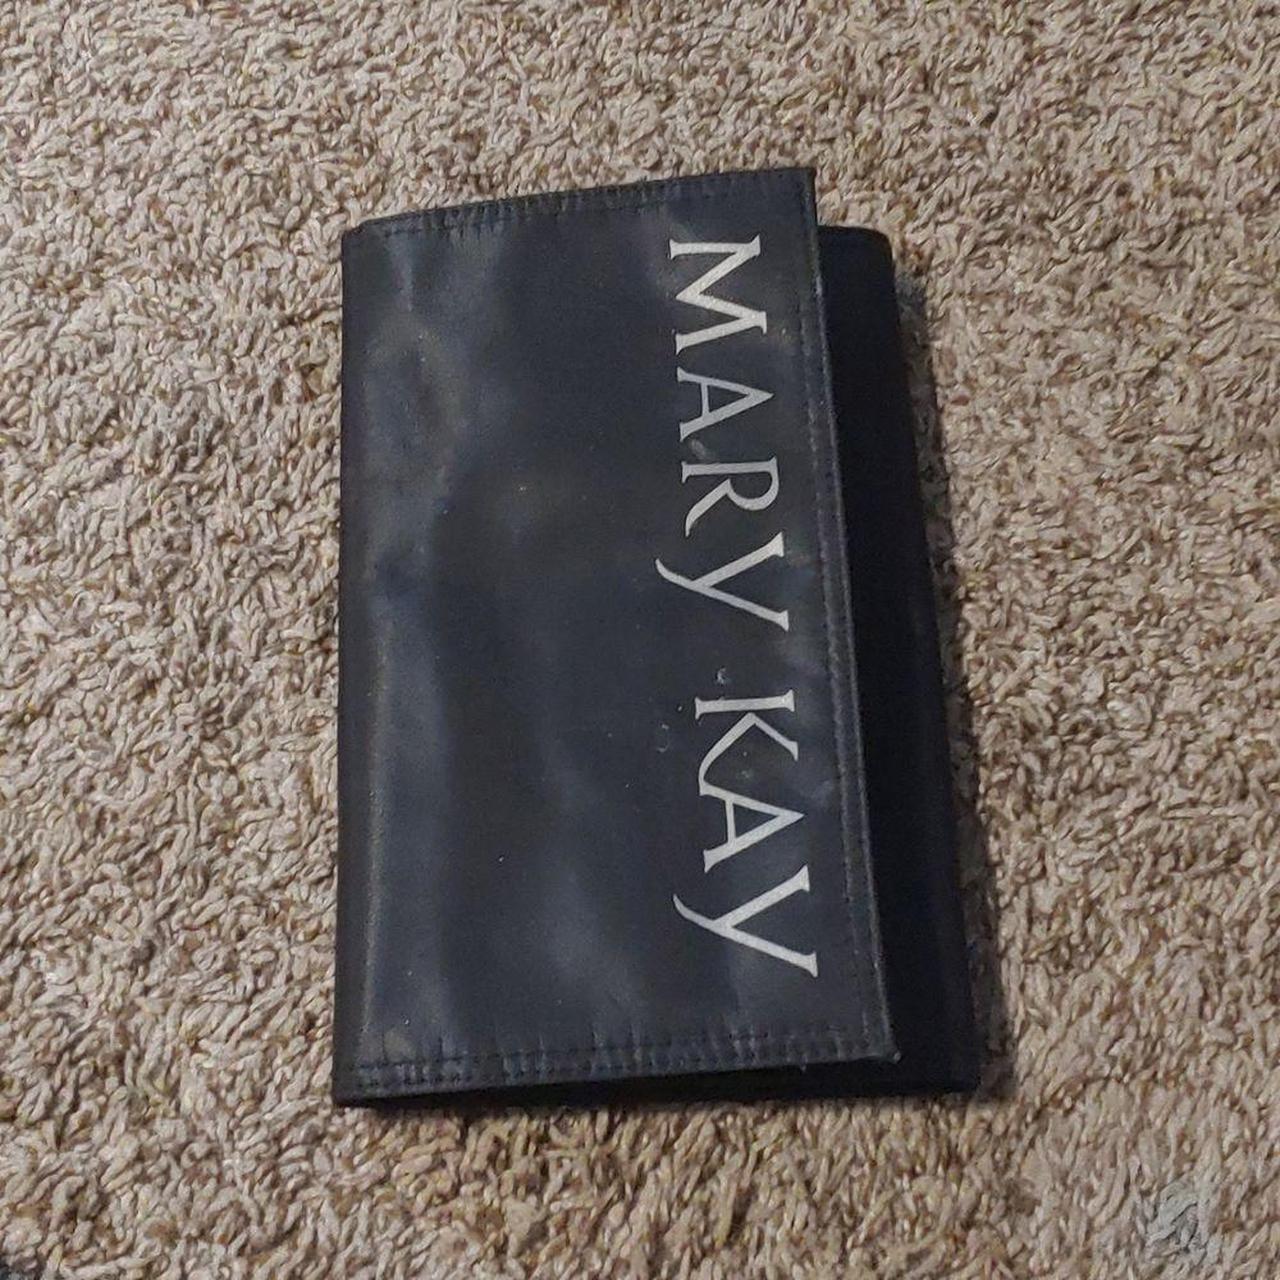 Product Image 1 - Mary kay makeup pouch
smoke free